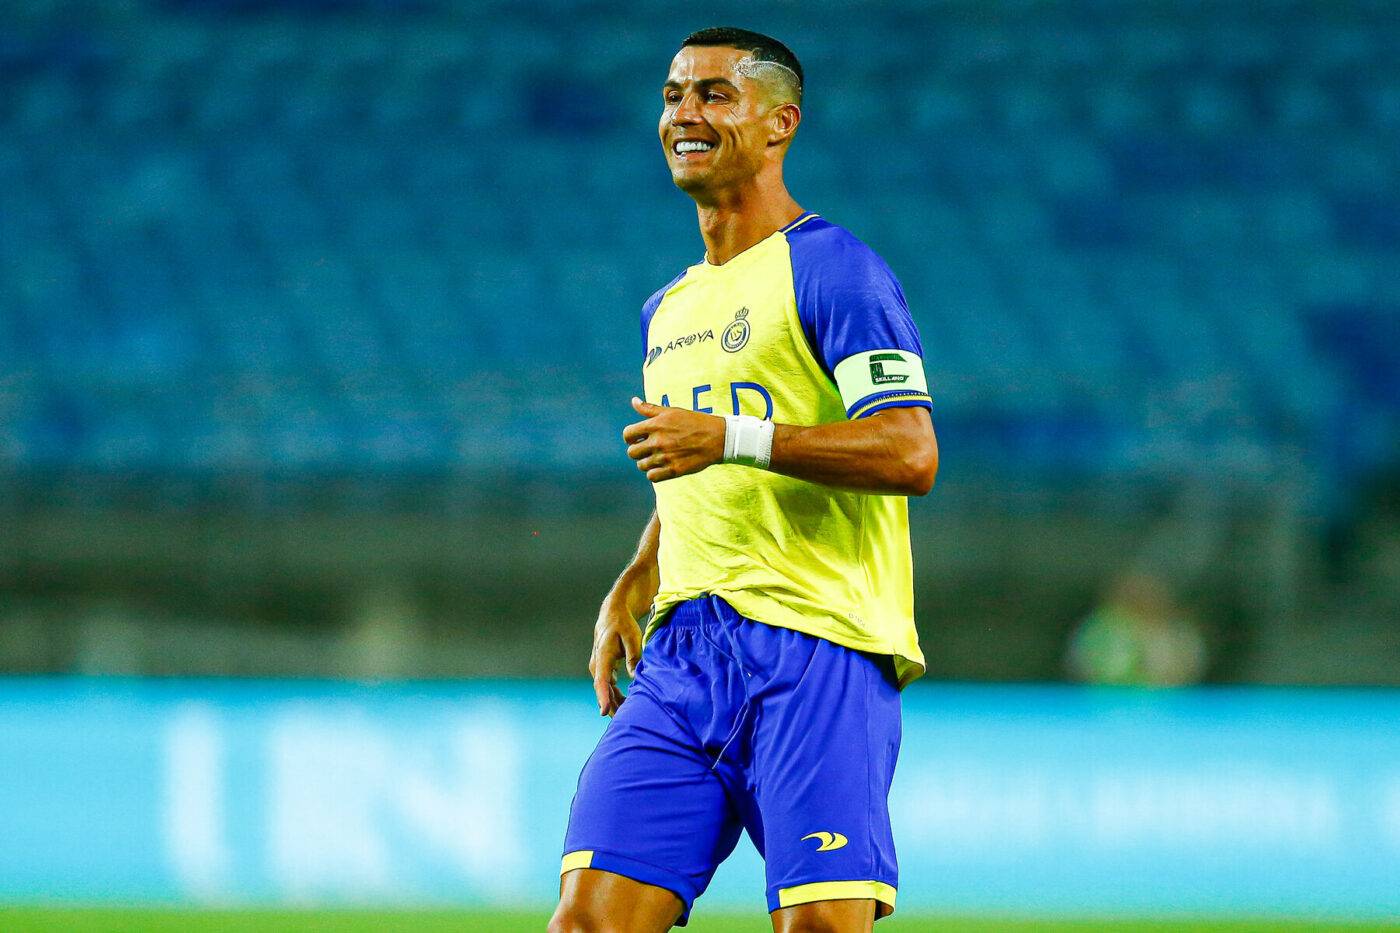 Cristiano Ronaldo Scores 850th Goal and Delivers Two Assists in Al-Nassr’s Victory: Moussa Dembélé Also Shines